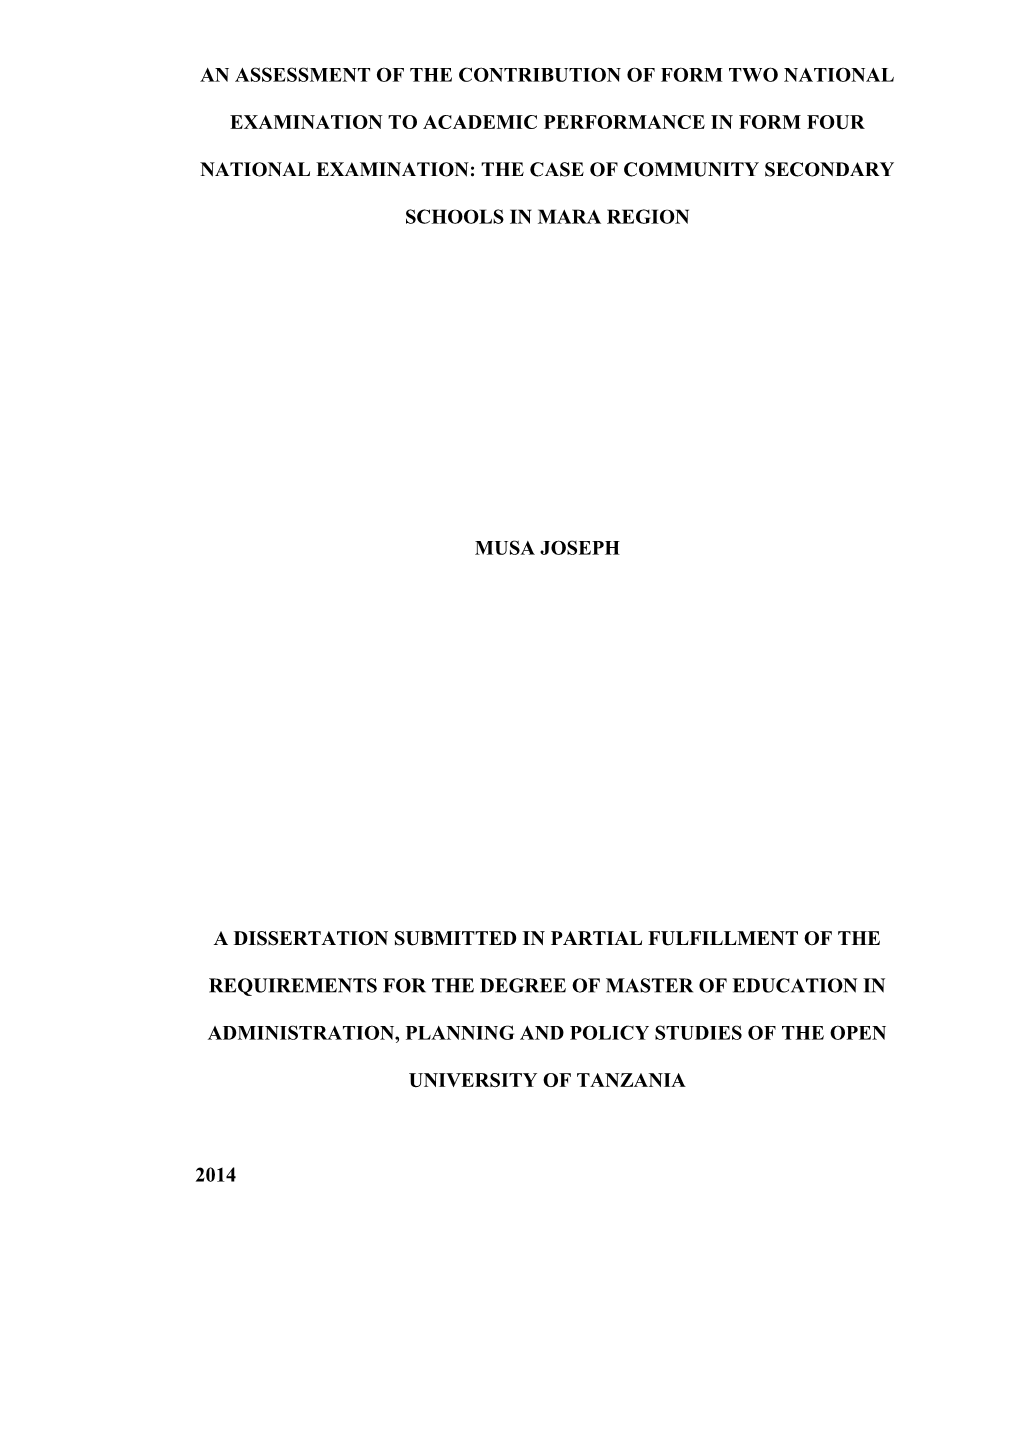 A Dissertation Submitted in Partial Fulfillment of the Requirements for the Degree Of